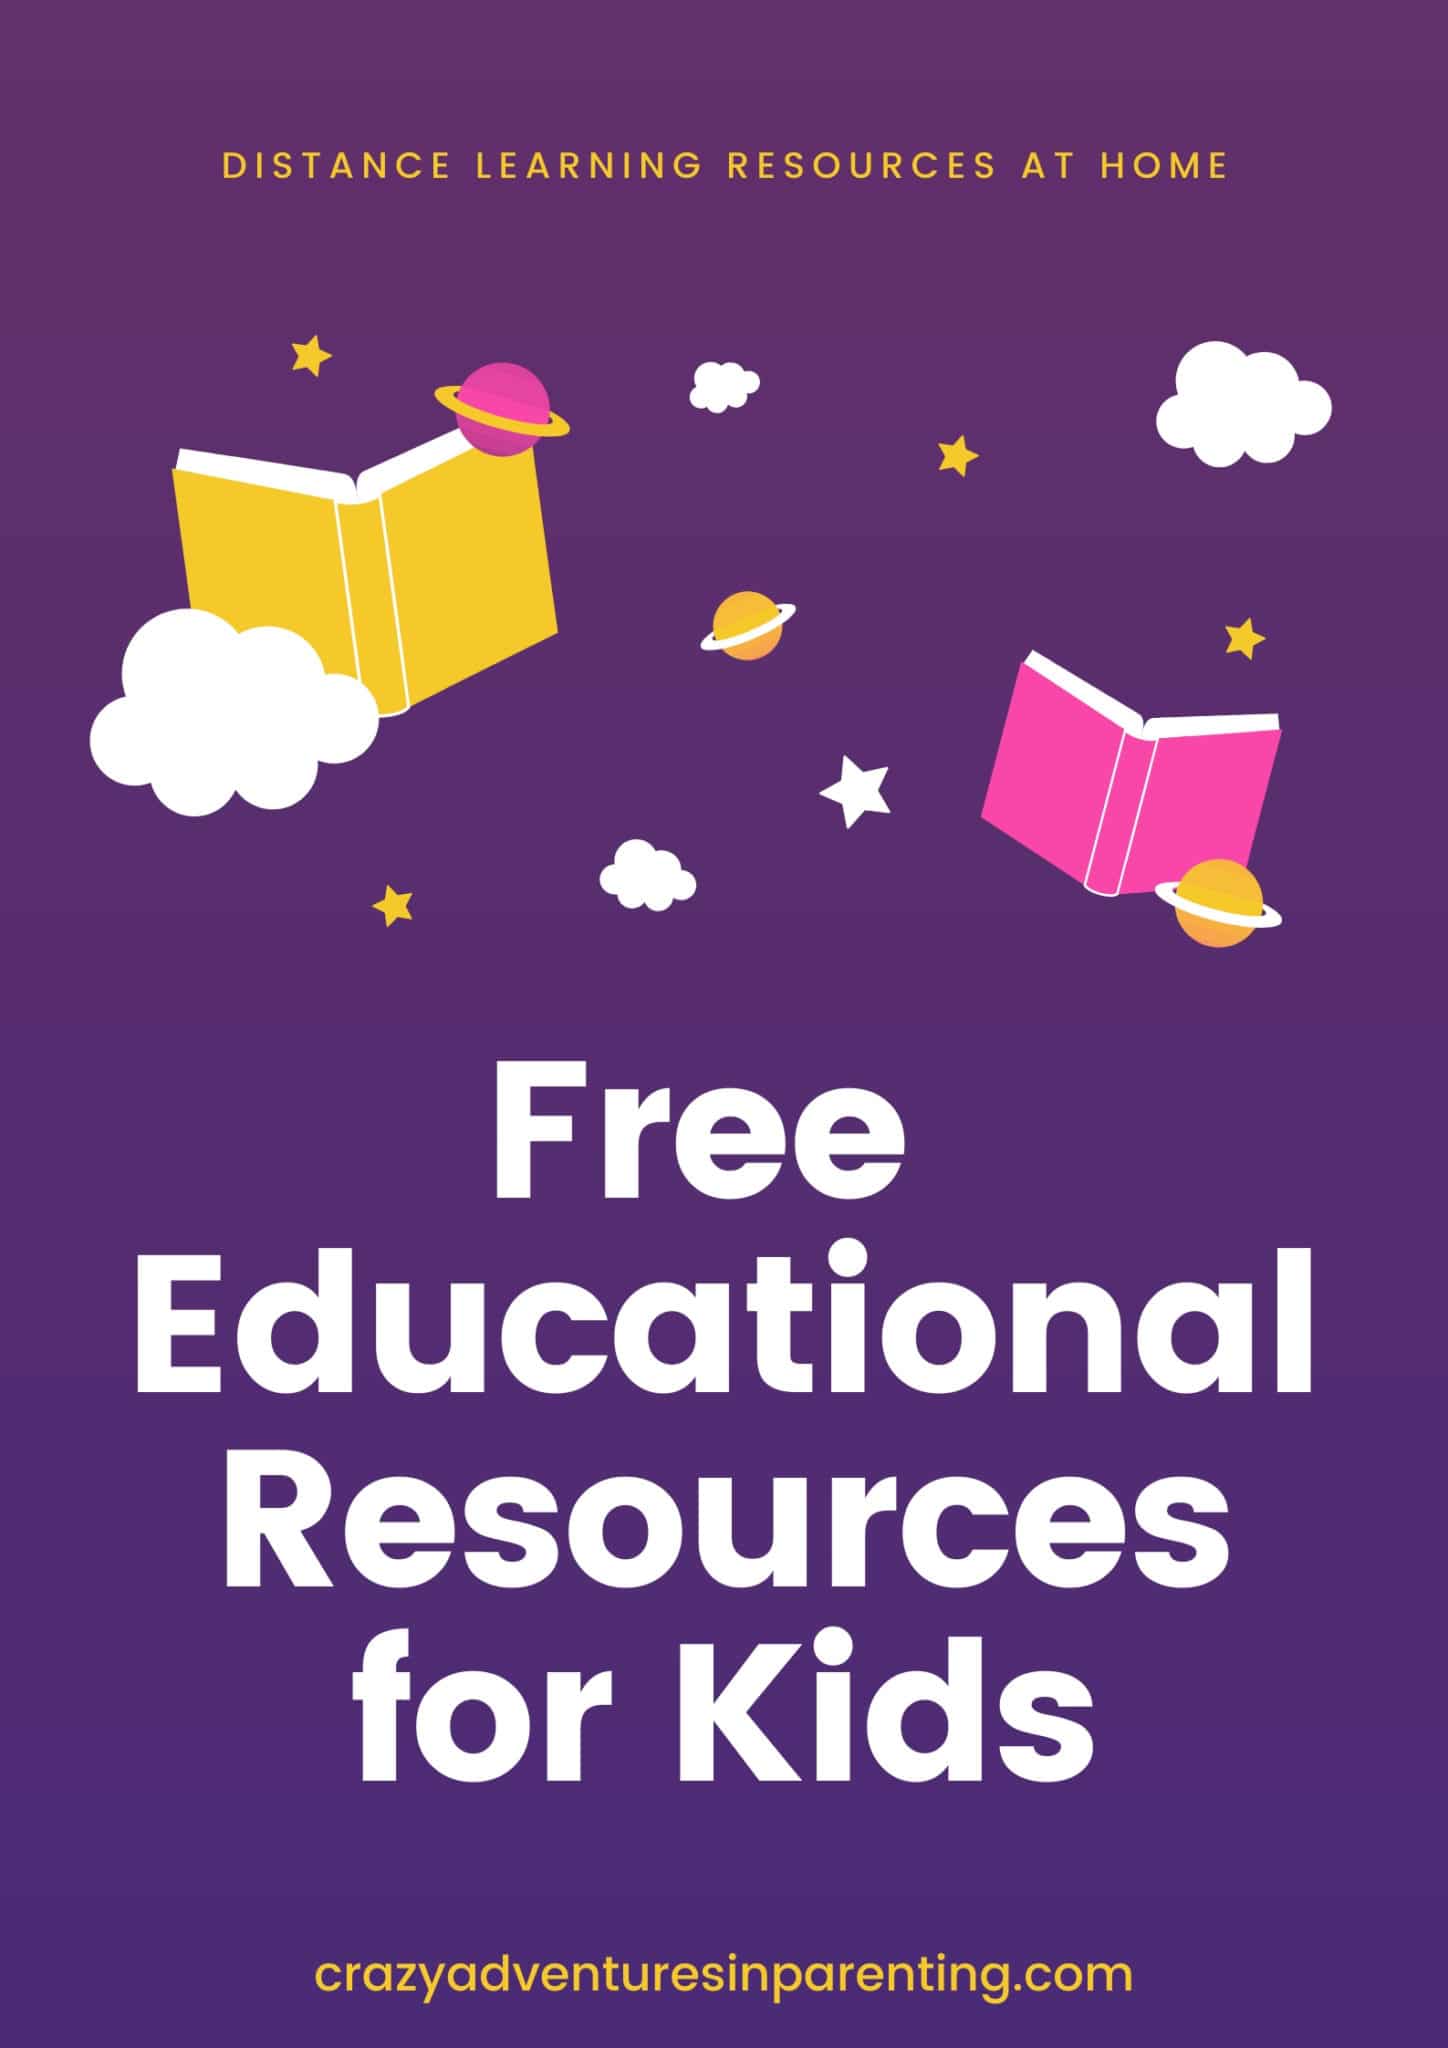 Free Distance Learning Educational Resources for Kids